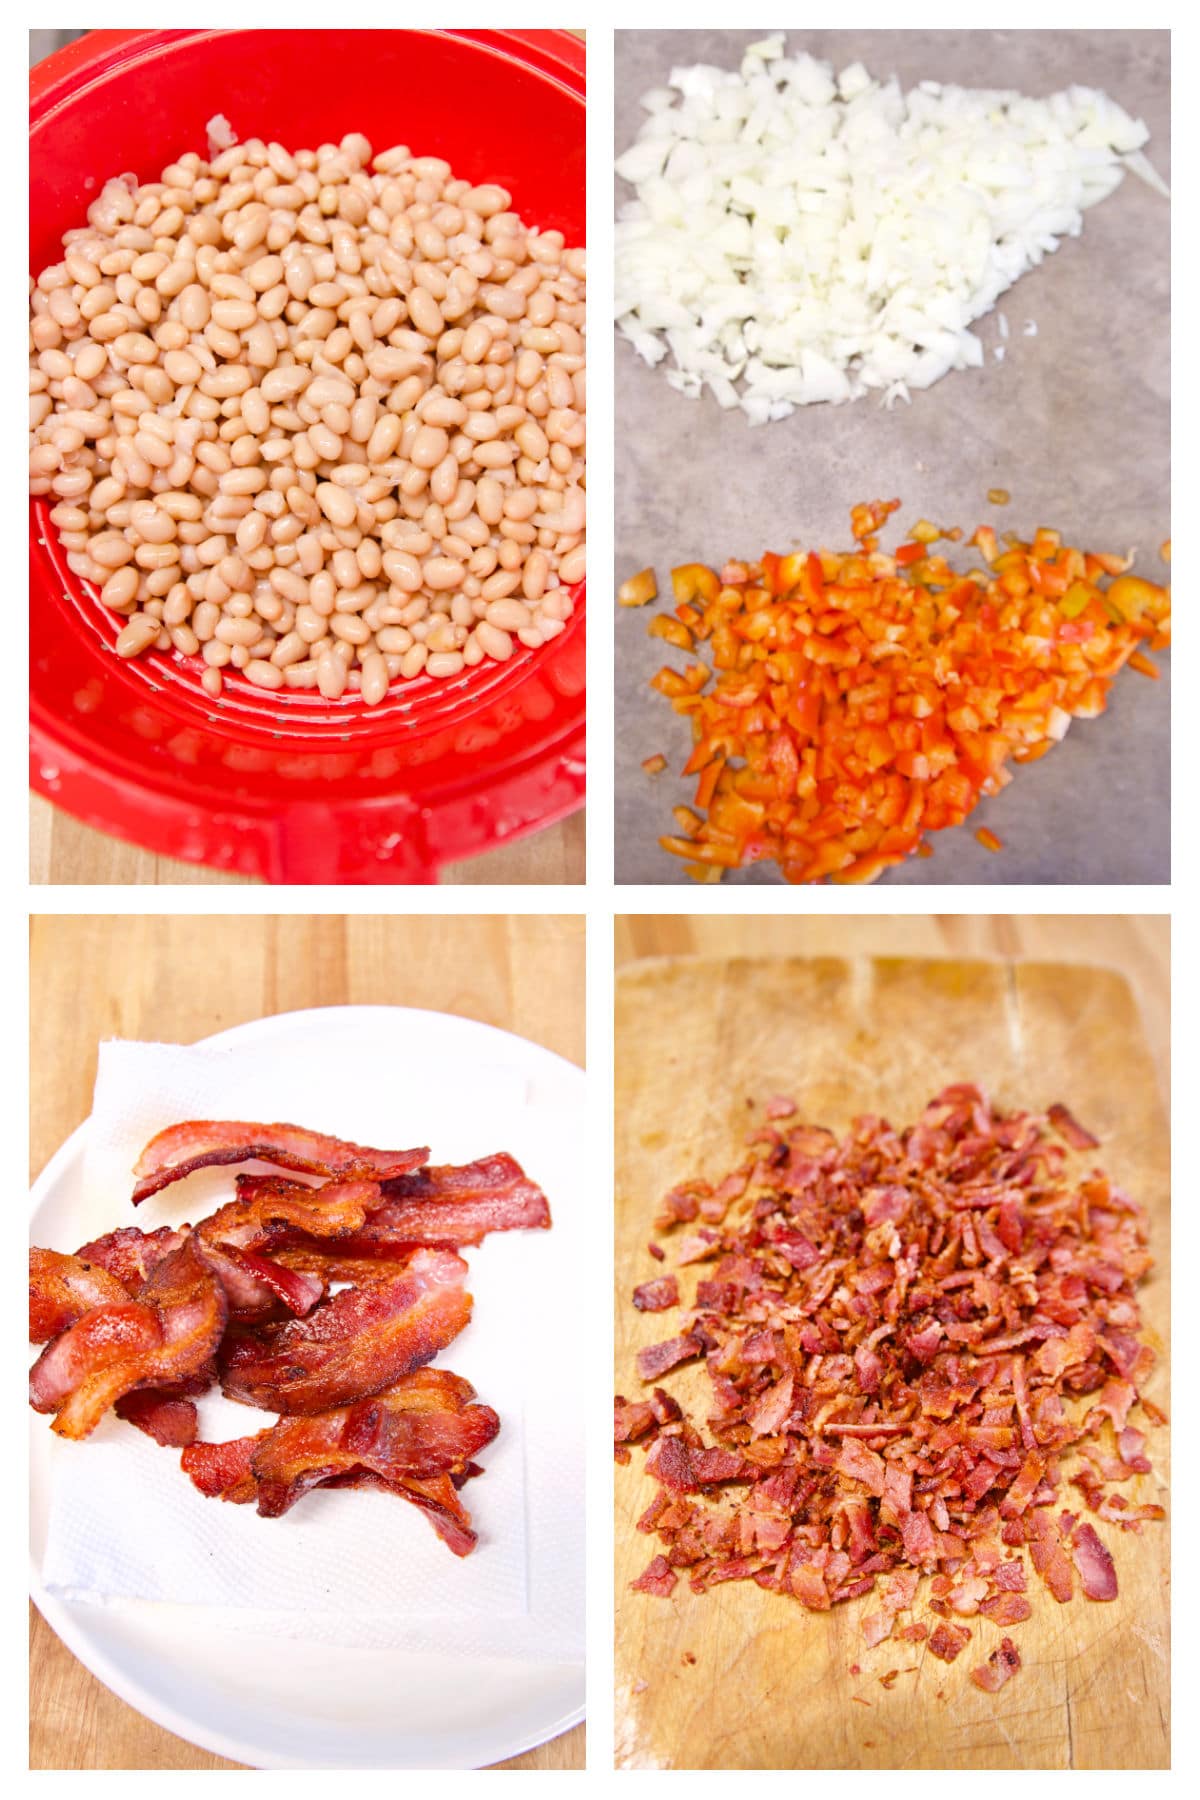 Collage for baked beans: draining beans, chopped vegetables, cooked bacon /diced.